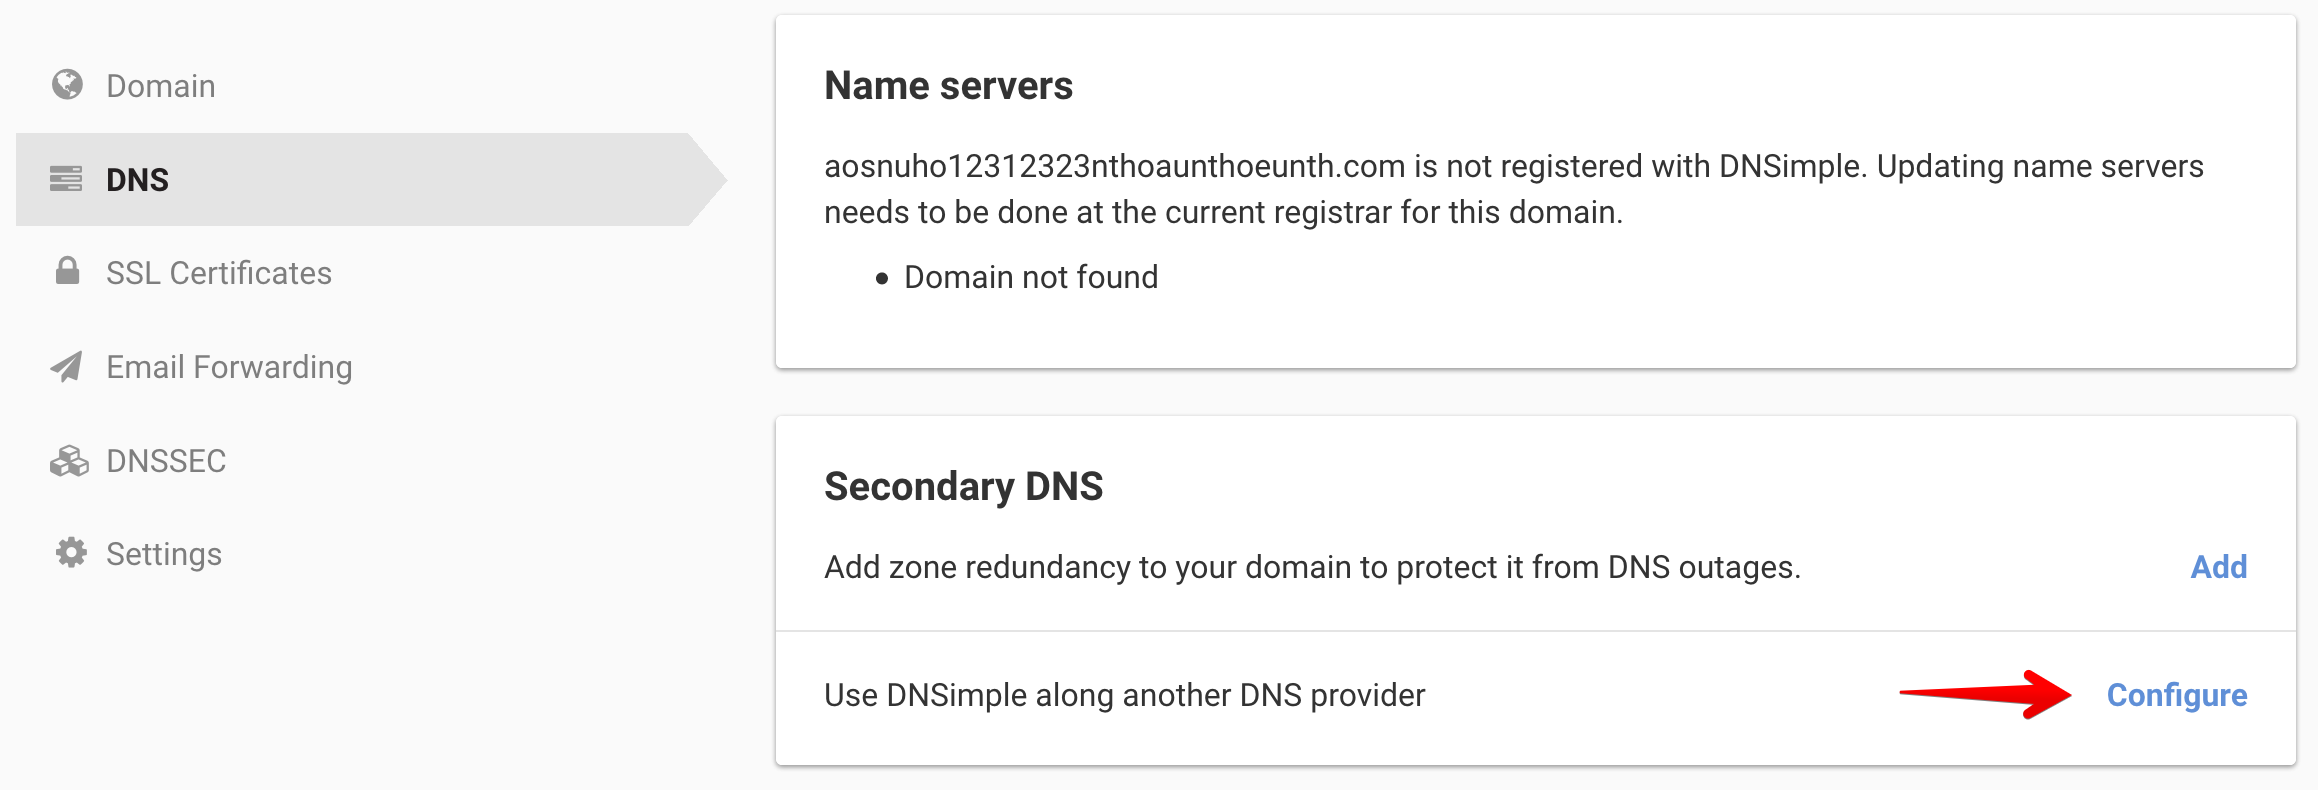 Change you Secondary DNS configuration